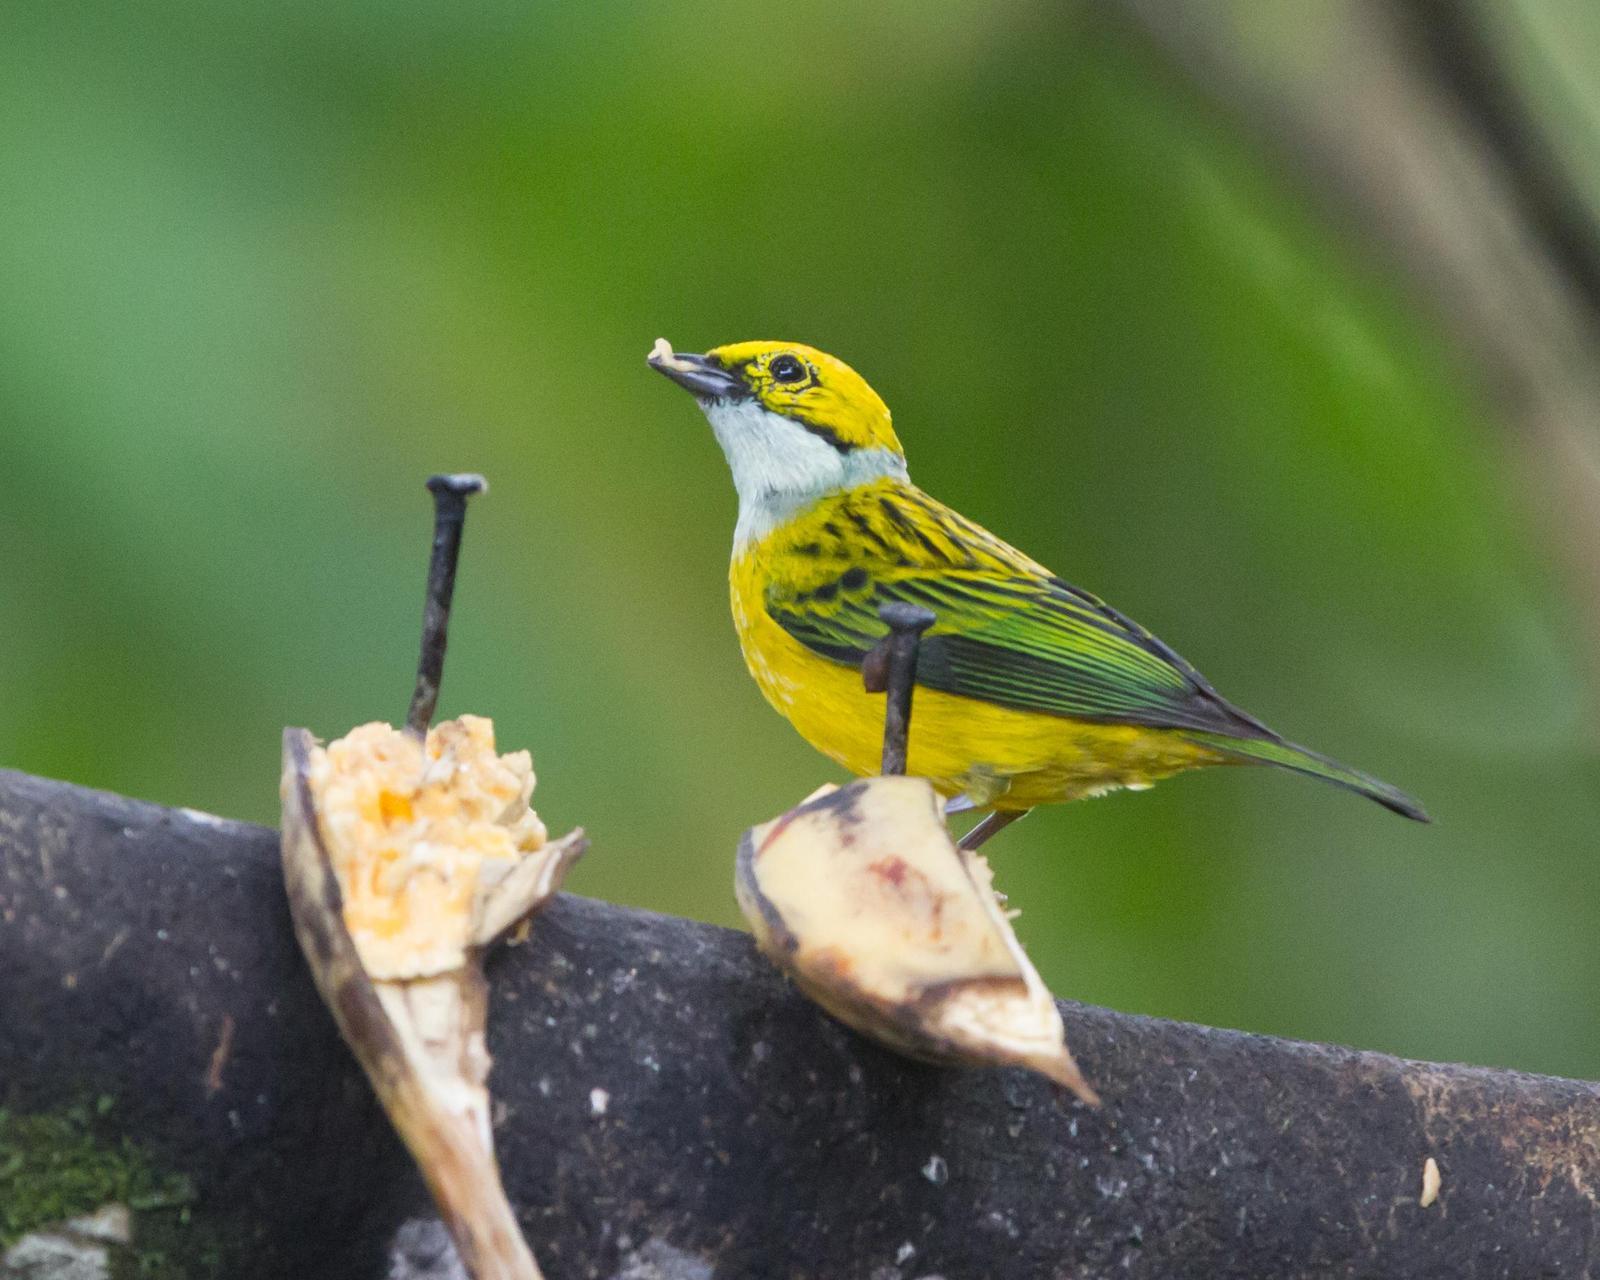 Silver-throated Tanager Photo by Kevin Berkoff